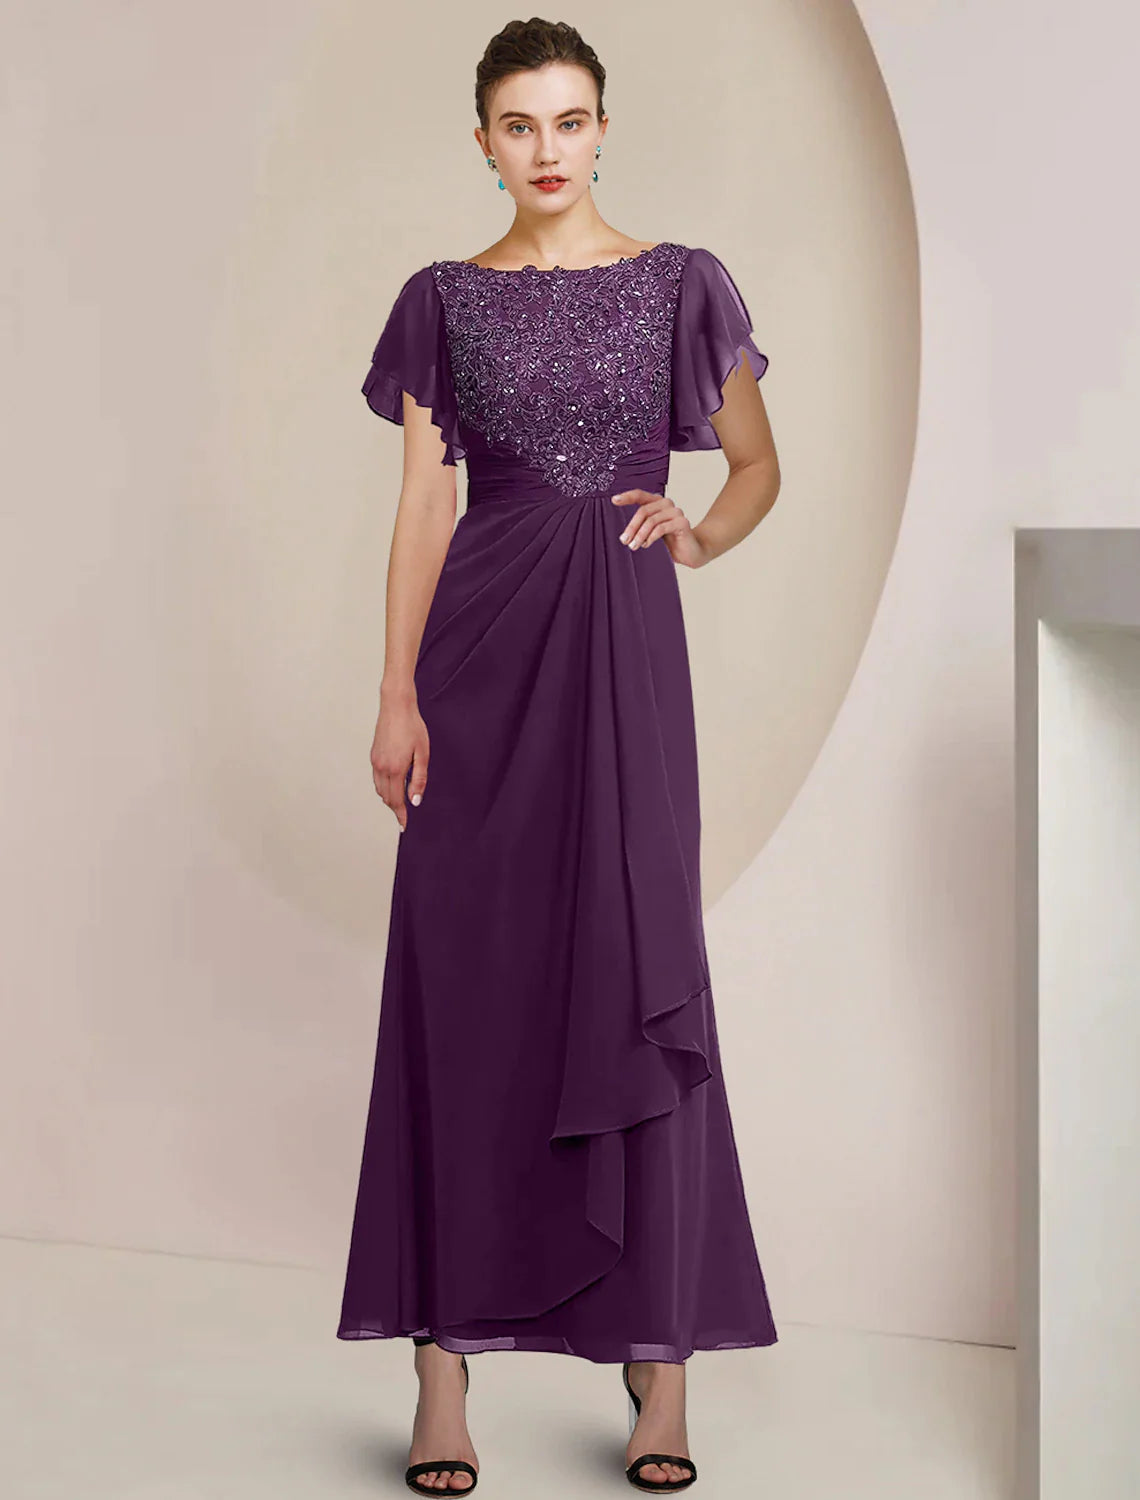 A-Line Mother of the Bride Dress Formal Wedding Guest Elegant Scoop Neck Tea Length Chiffon Lace 3/4 Length Sleeve with Beading Sequin Appliques